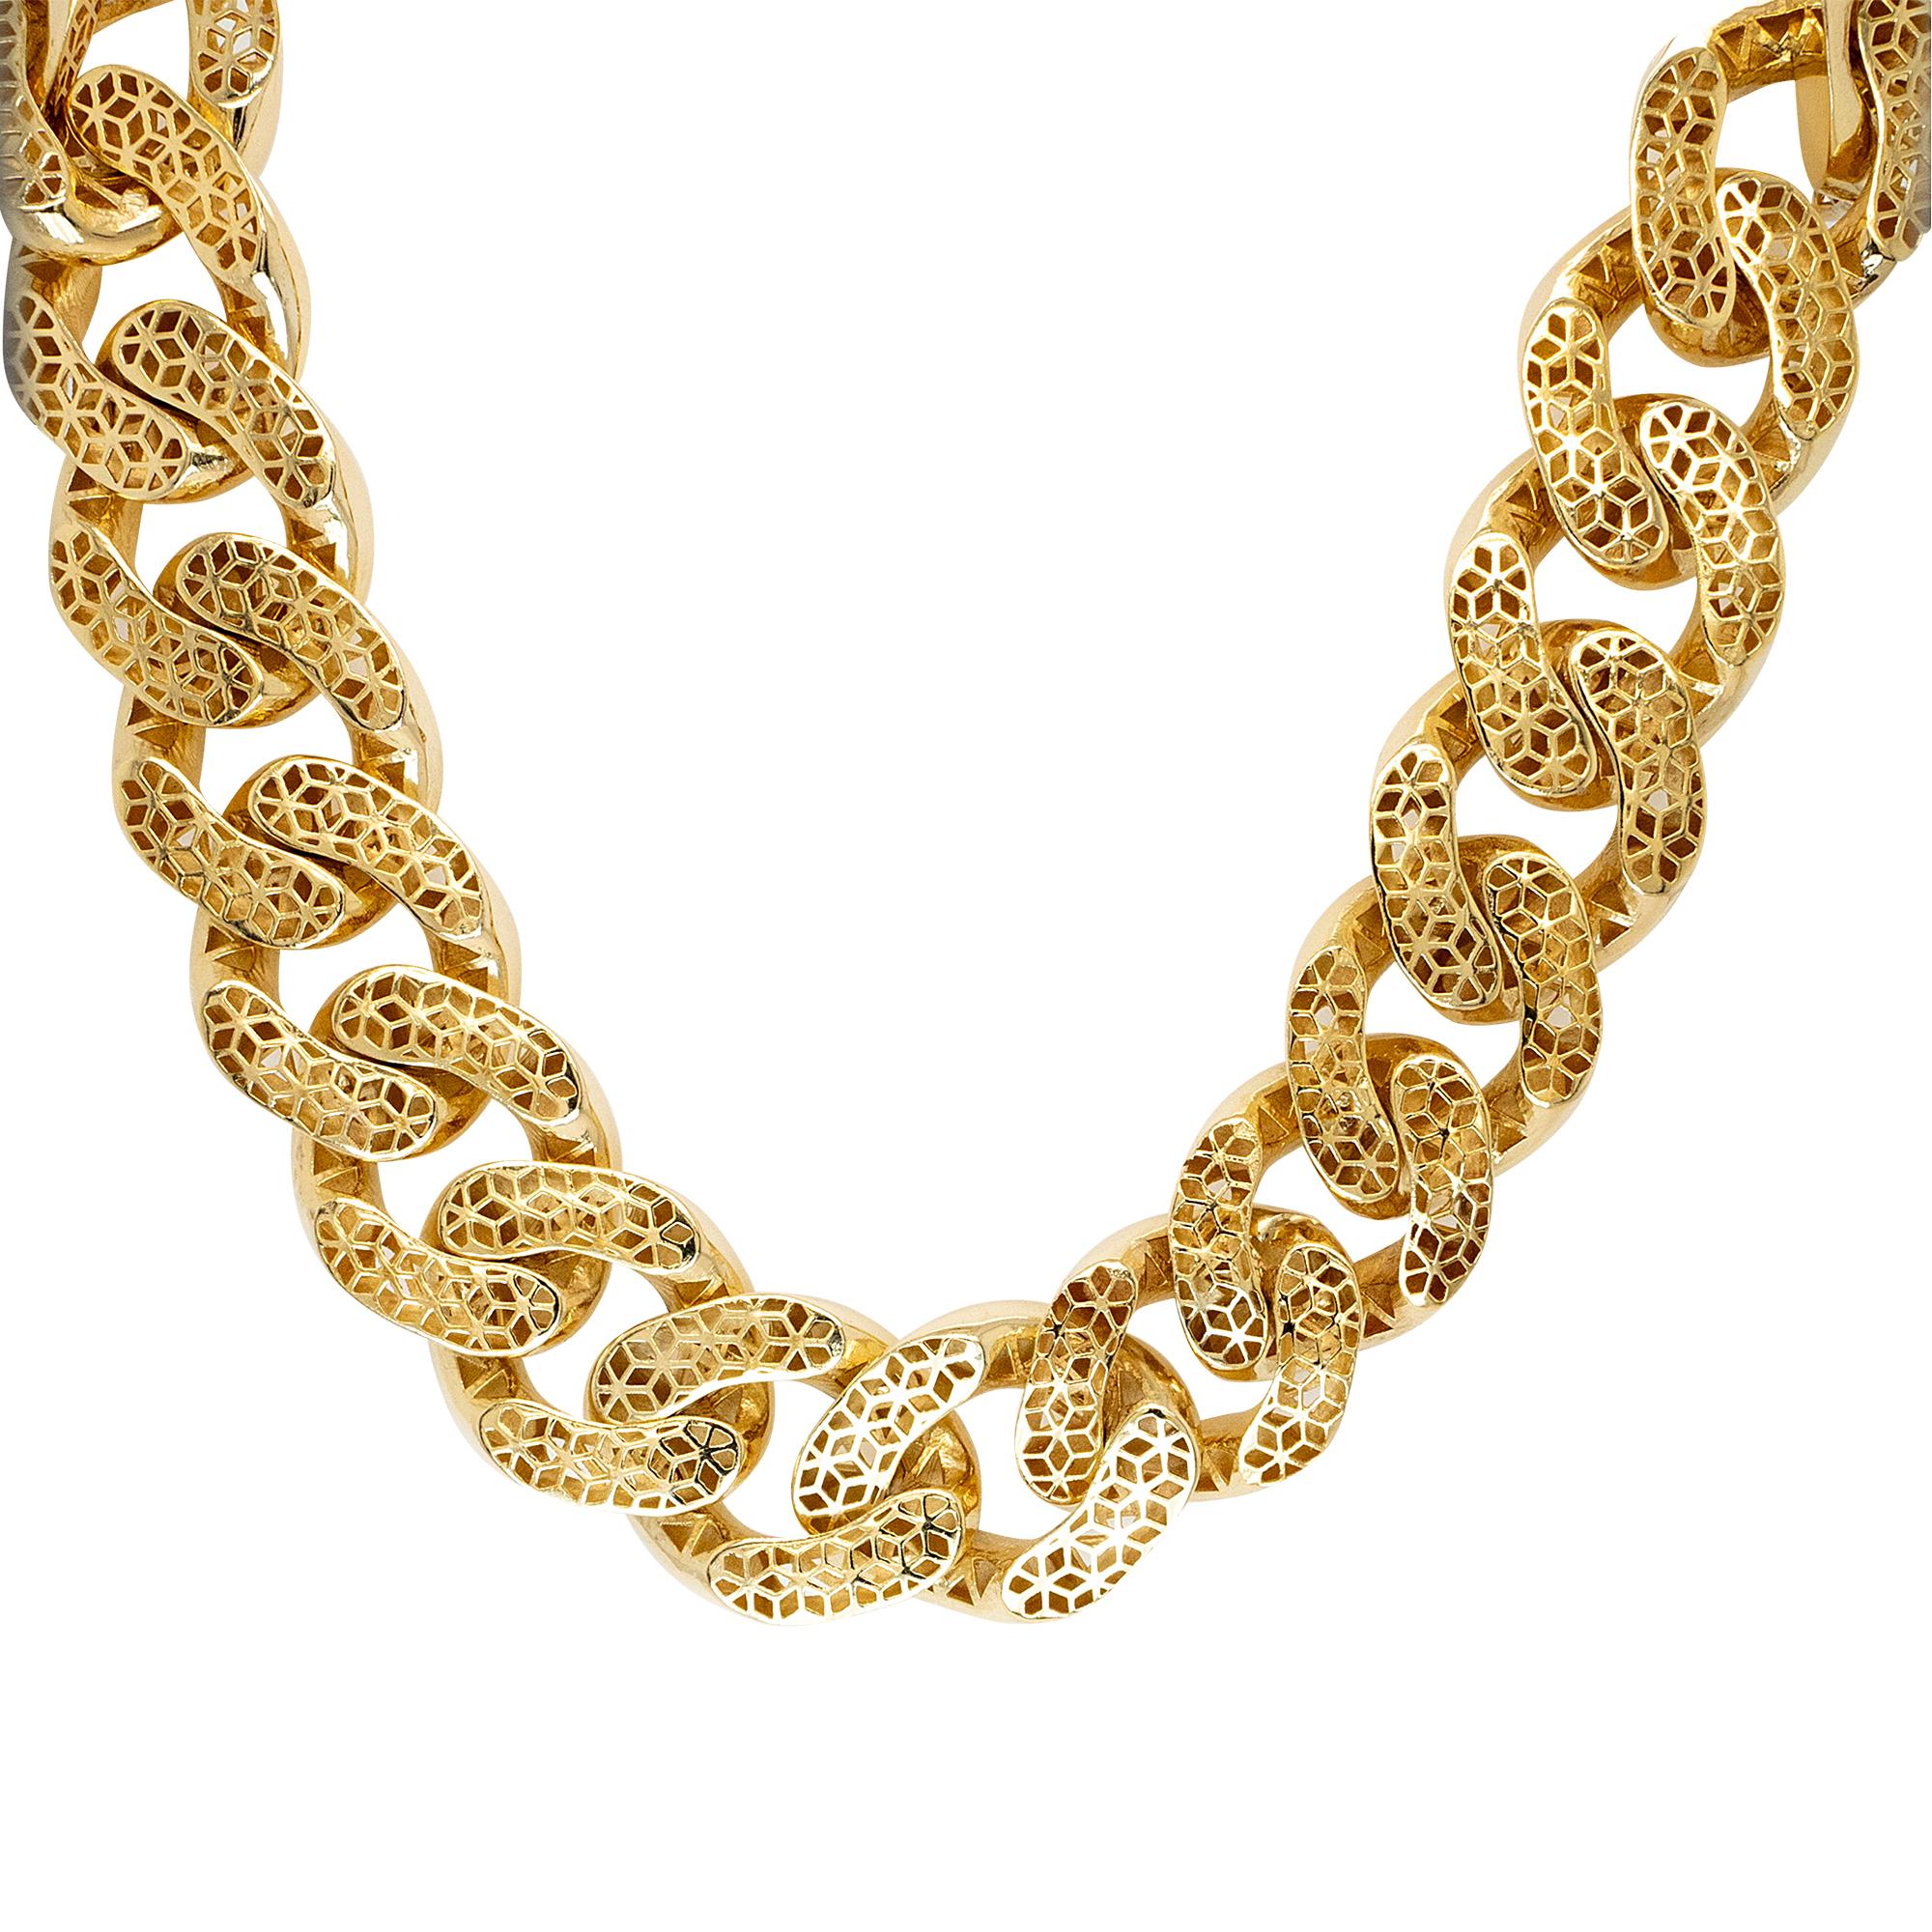 10k Yellow Gold Custom Link Jumbo Light Chain Necklace In Excellent Condition For Sale In Boca Raton, FL